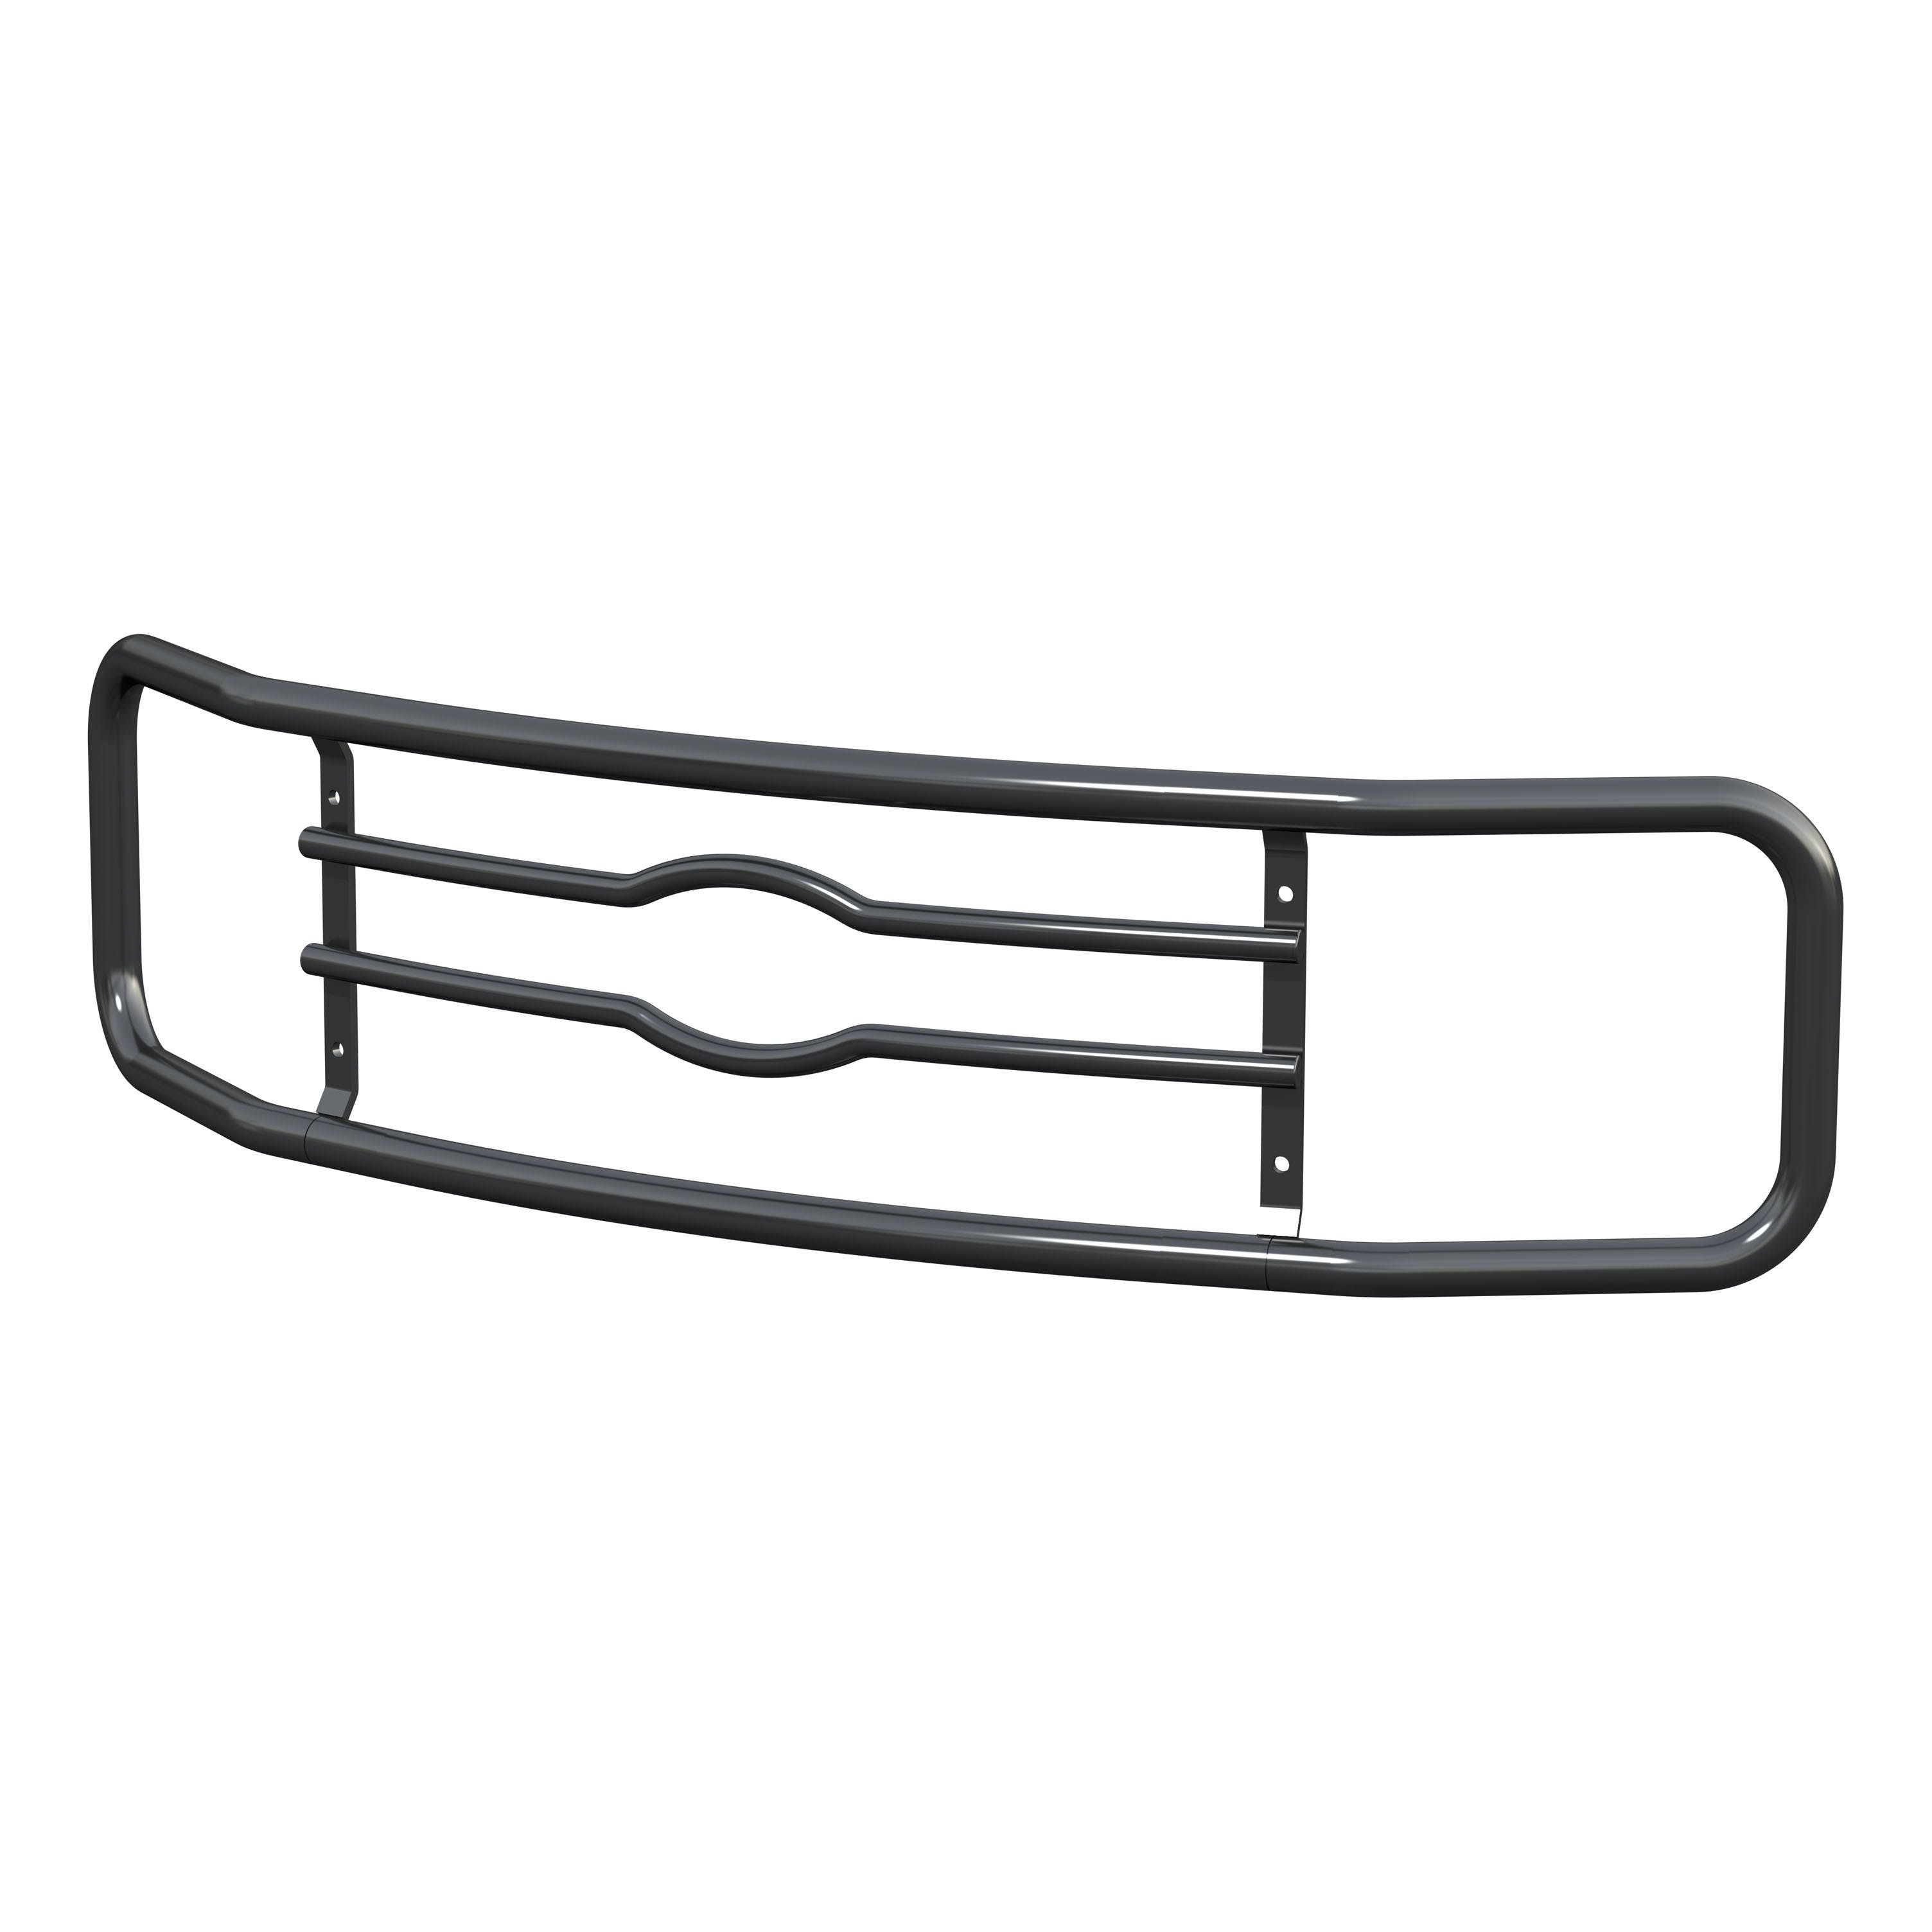 LUVERNE 340923 2 inch Tubular Grille Guard Ring Assembly